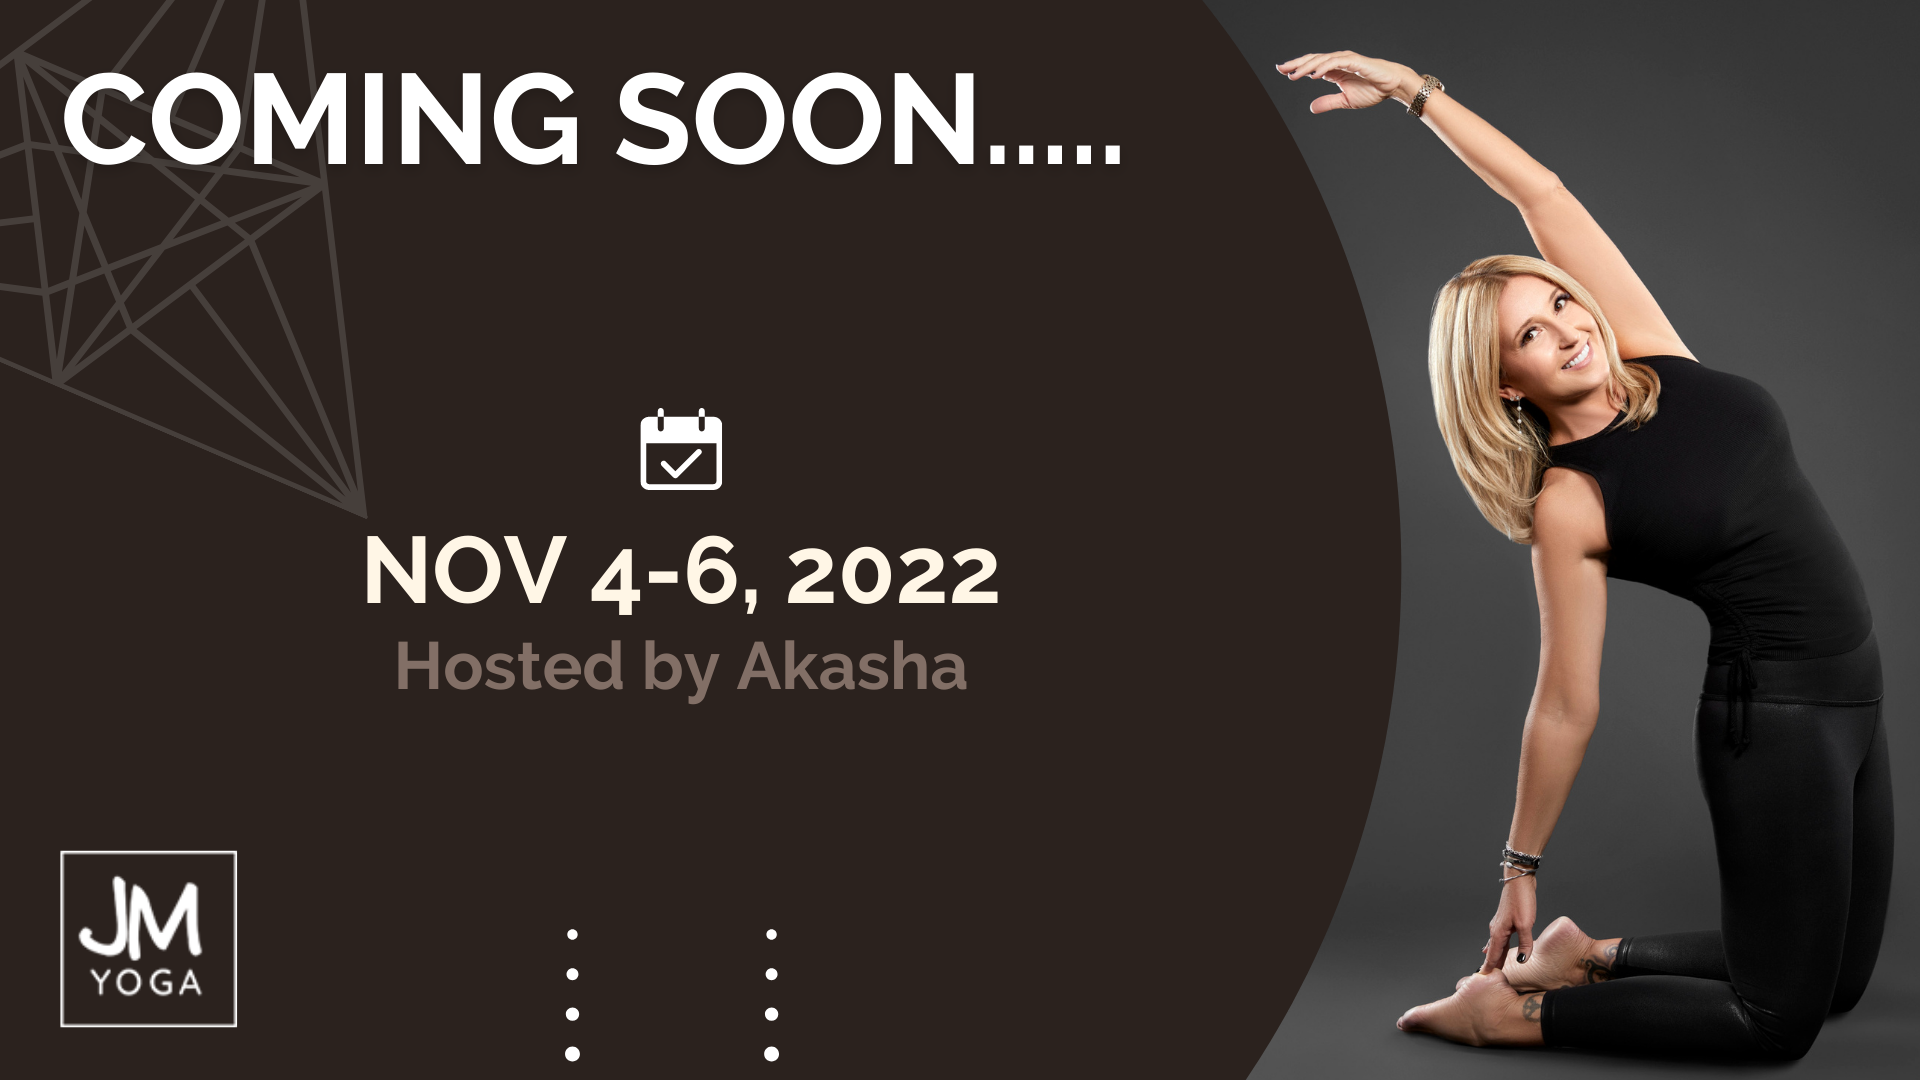 Promotion graphic with Jules in a kneeling backbend against a black background with the words coming soon Nov 4-6 to akasha studio